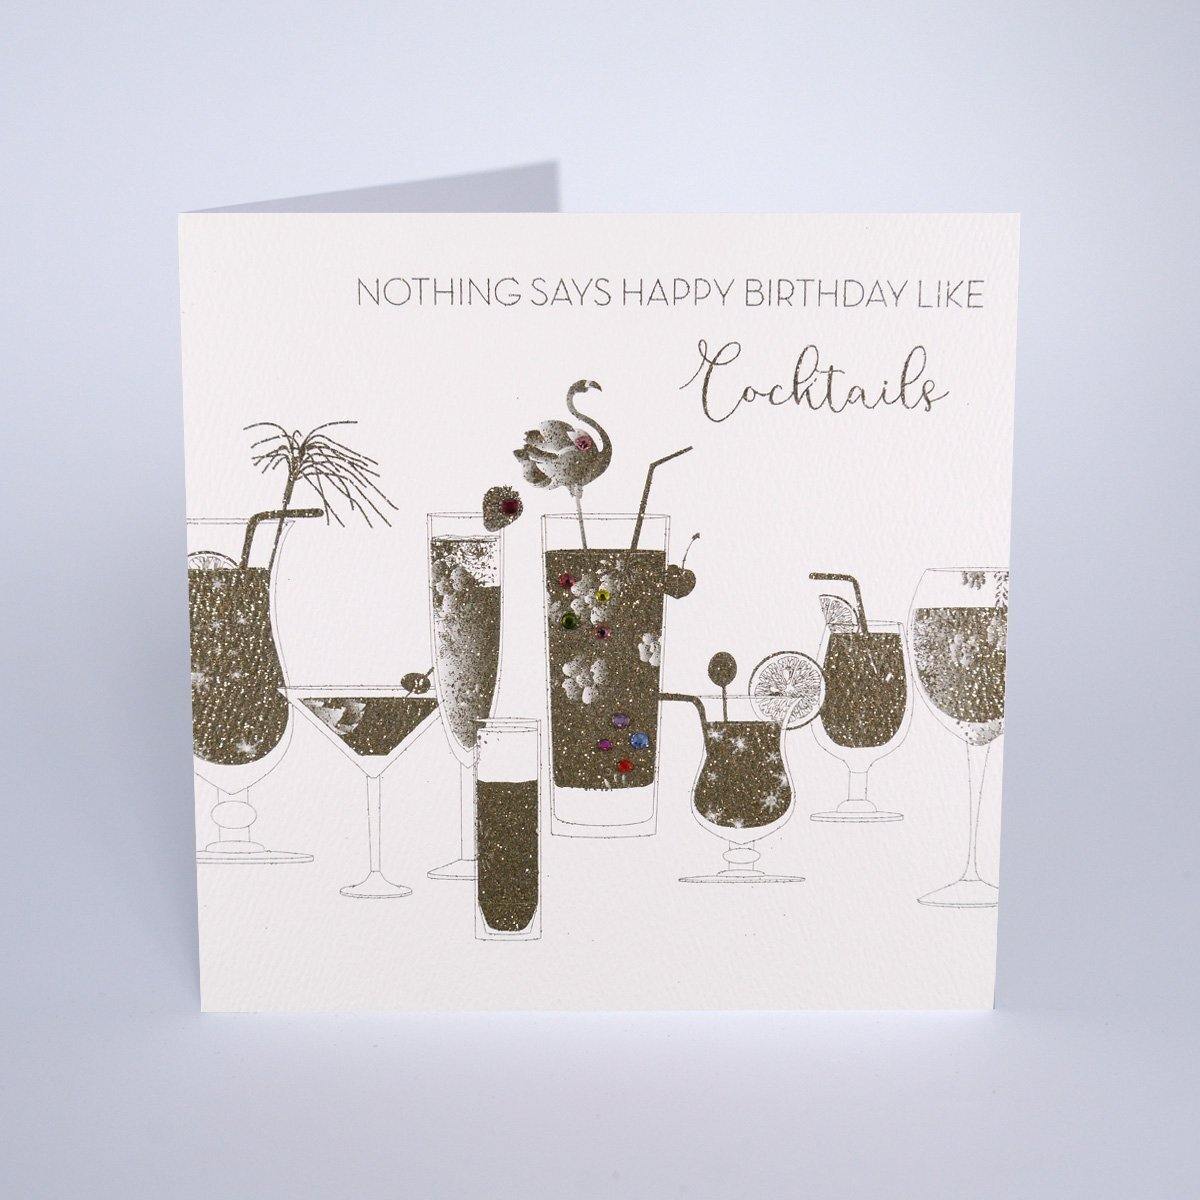 Nothing Says Happy Birthday Like Cocktails - Birthday Card - TwoBeeps.co.uk